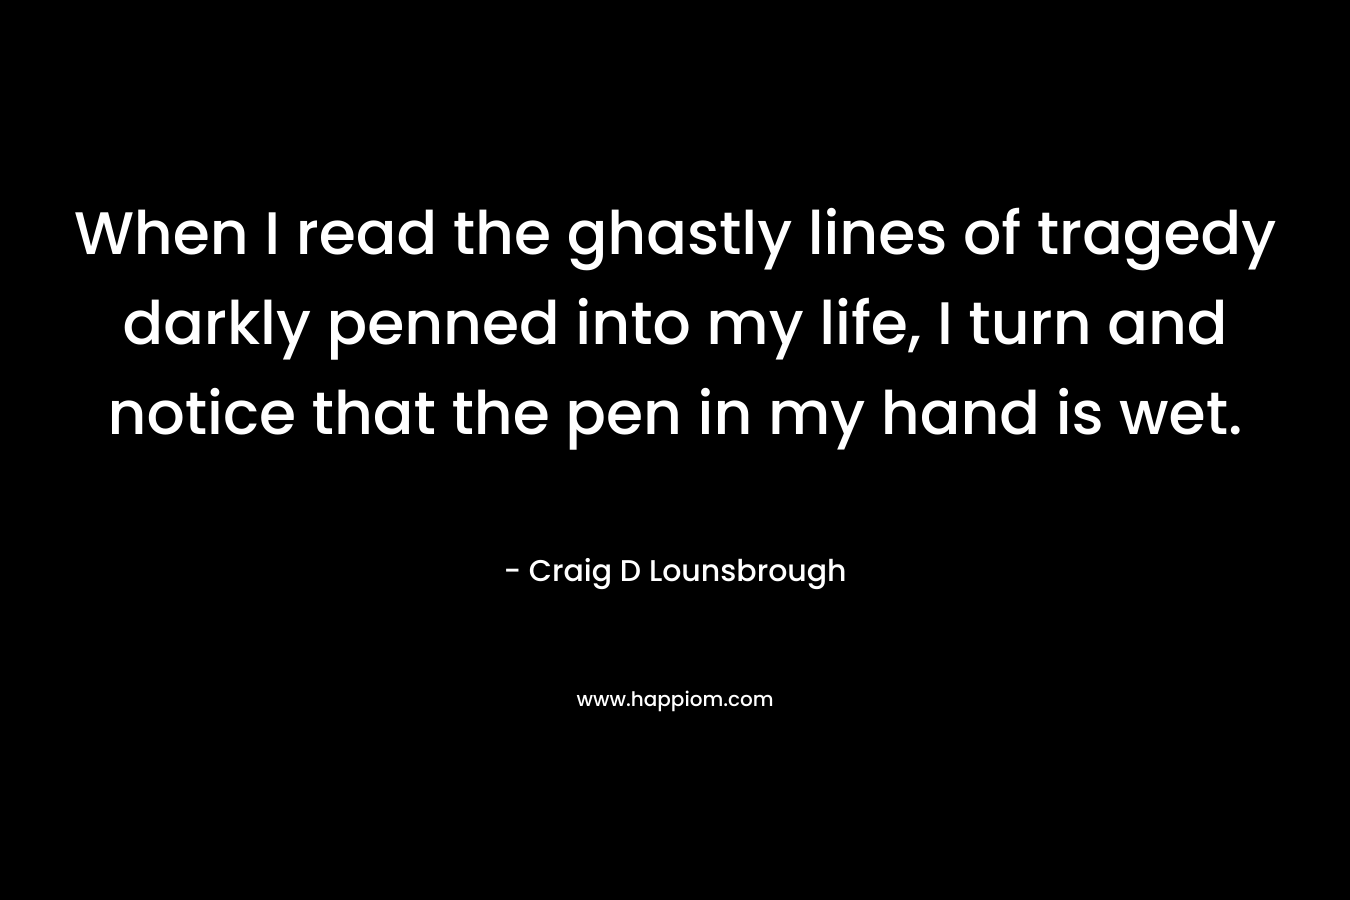 When I read the ghastly lines of tragedy darkly penned into my life, I turn and notice that the pen in my hand is wet. – Craig D Lounsbrough